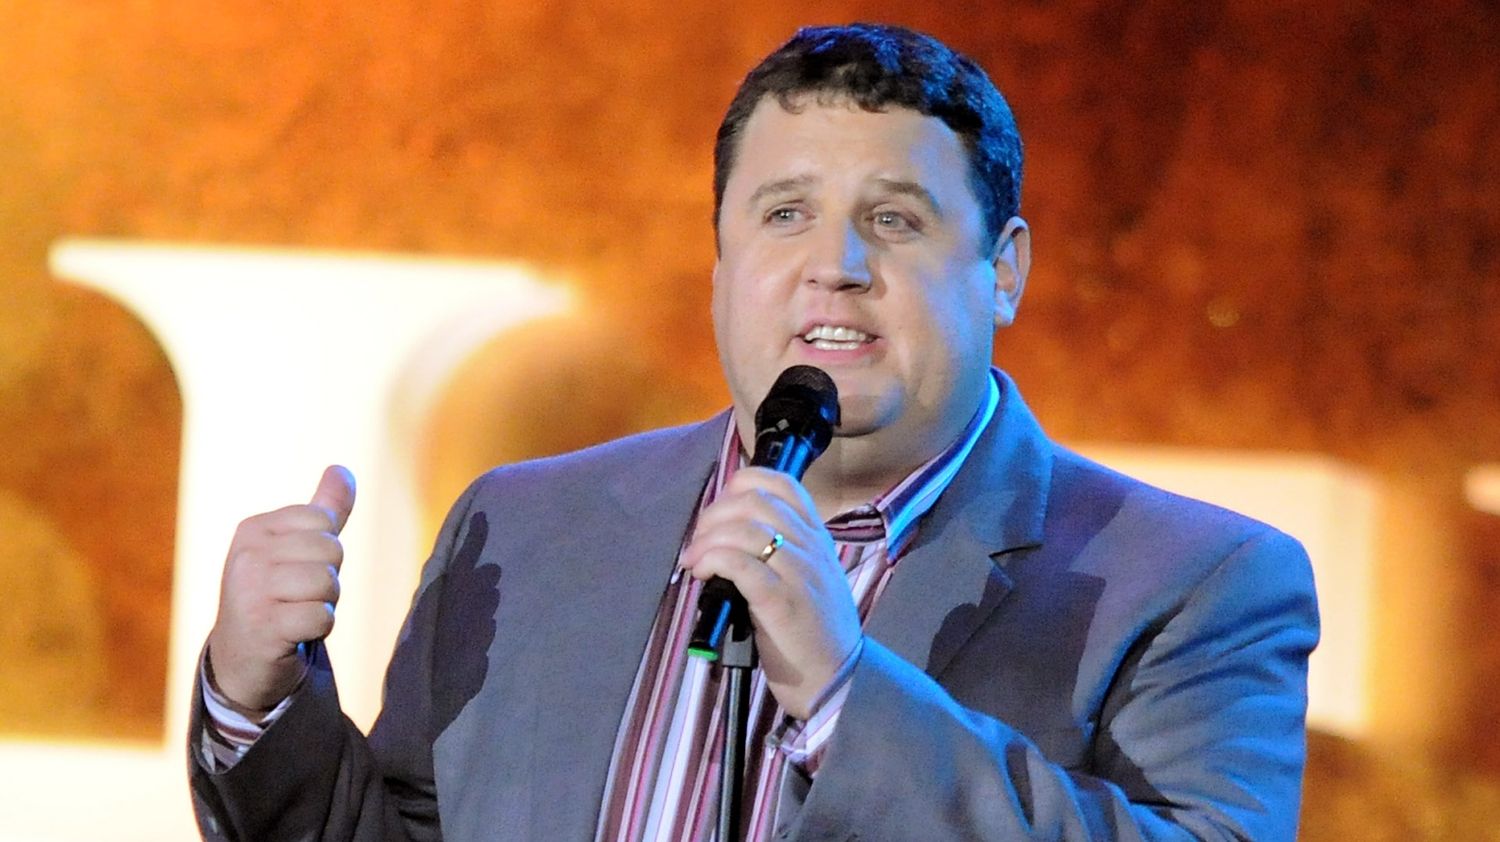 peter kay tour how to buy tickets